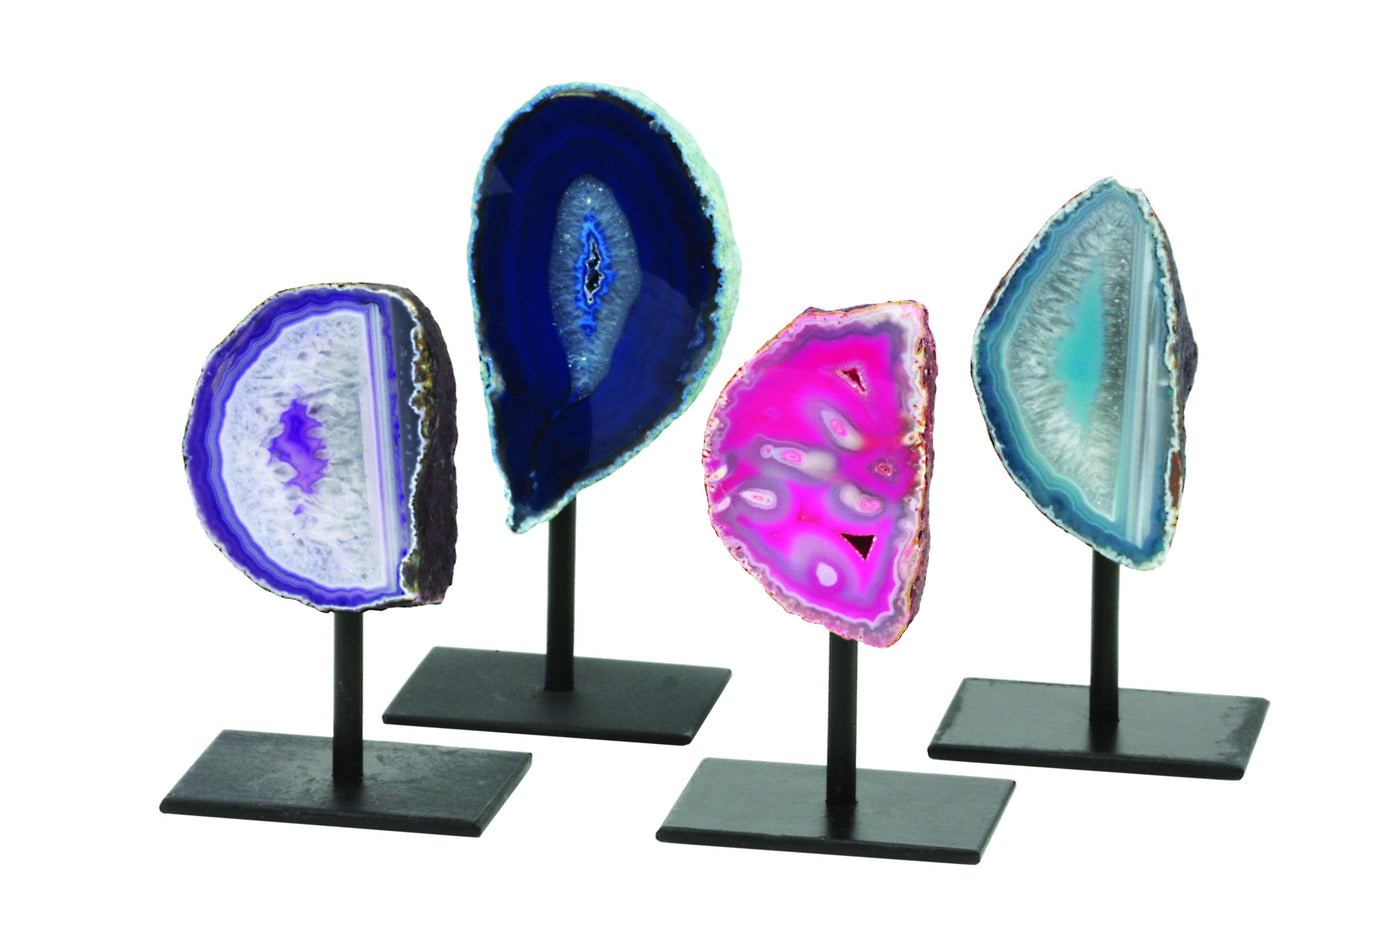 Four agate geode on metal base displaying color options, patterns and different shapes.